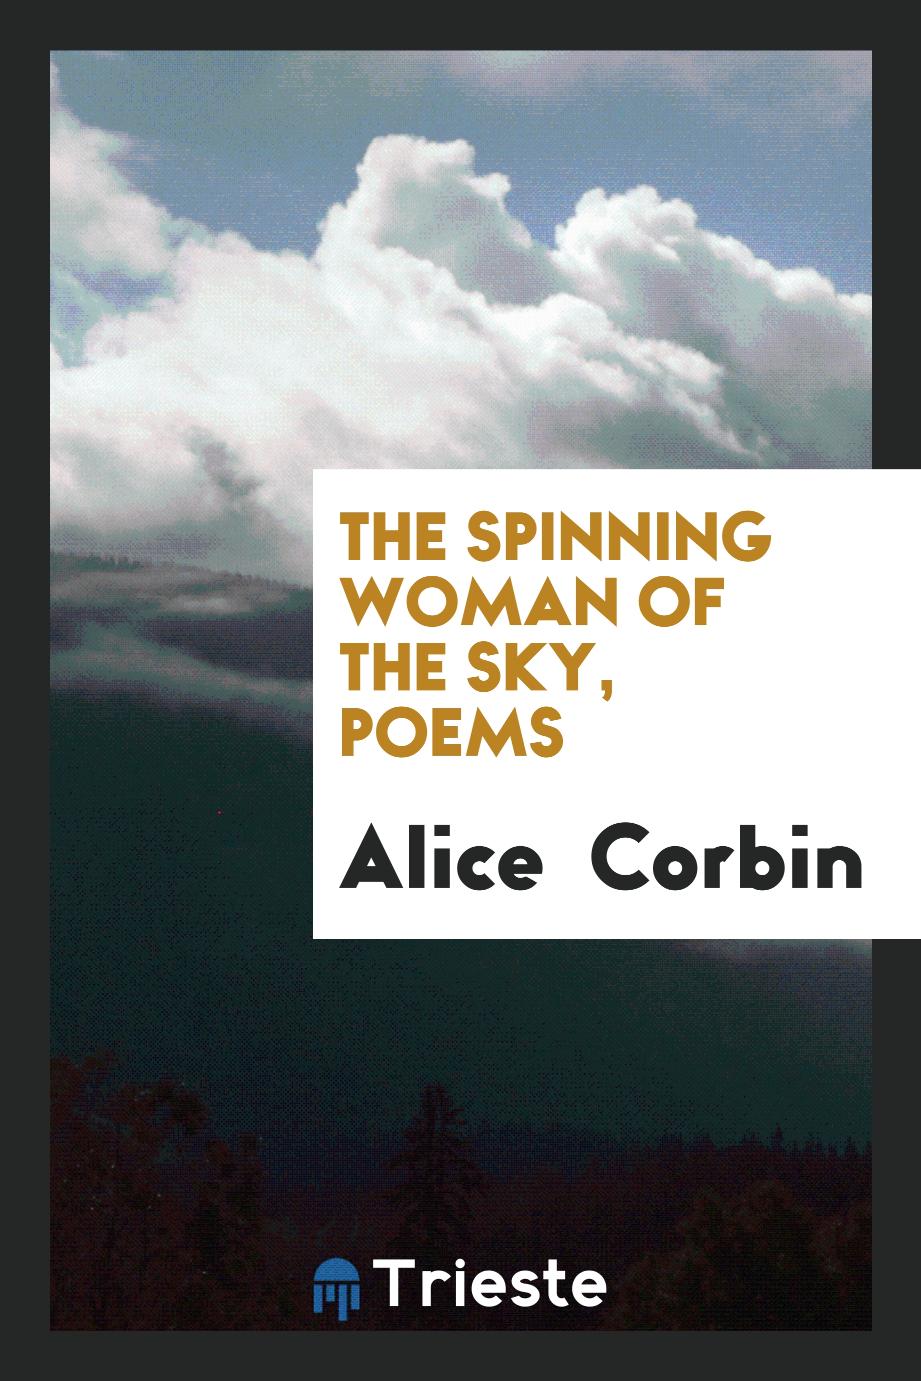 The spinning woman of the sky, poems